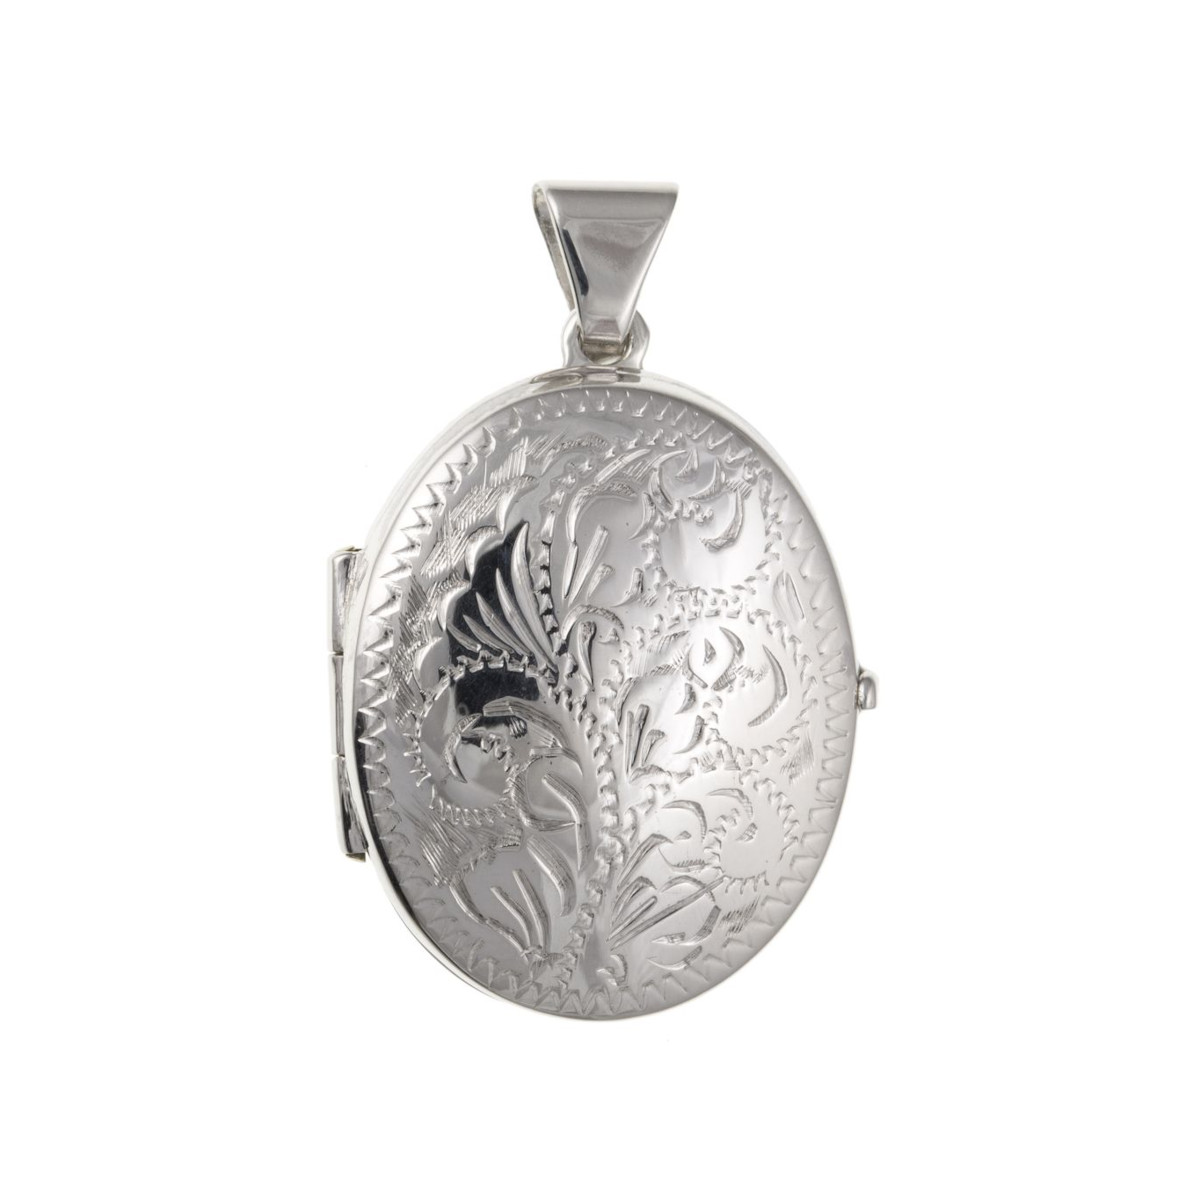 oval-shaped engraved silver locket